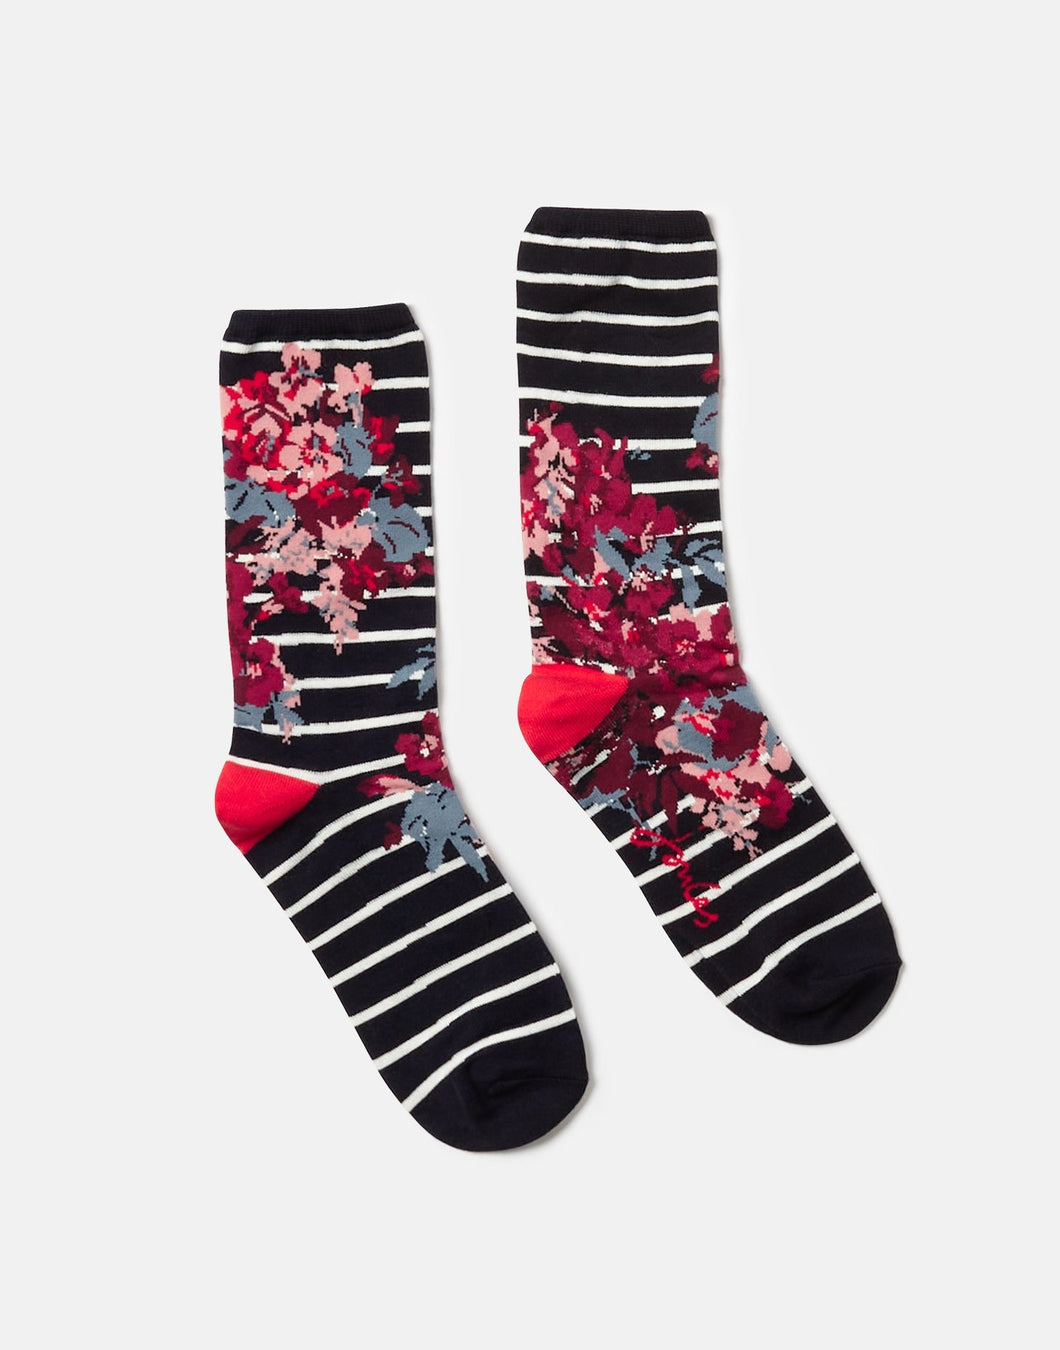 Joules Excellent Everyday Single Eco Vero Socks / French Navy Floral Size 4-8